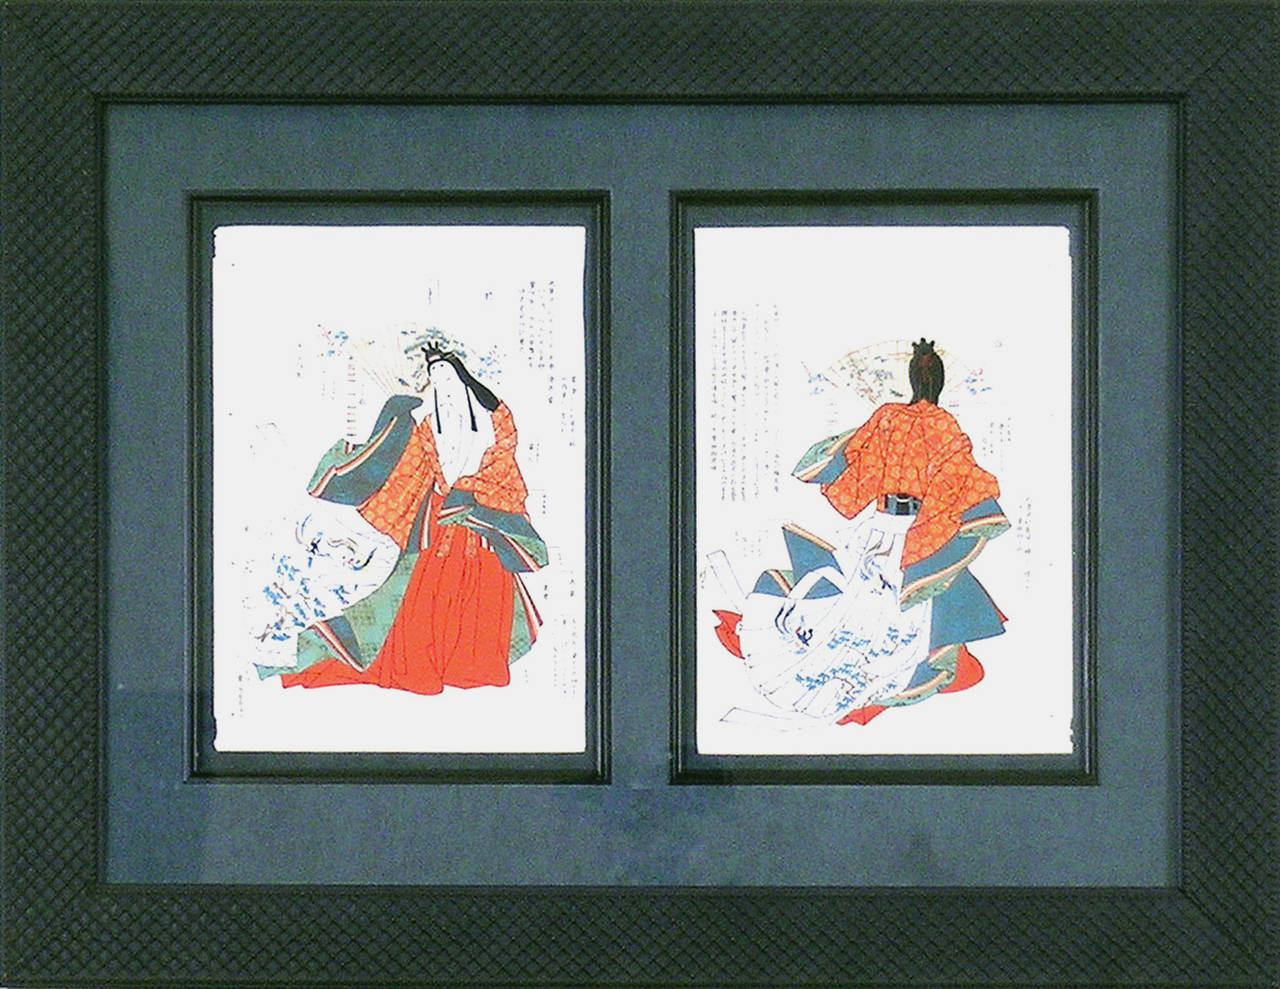 Floral Kimono in Red and Green  (Front and Back) - Print by Matsui Yuoku